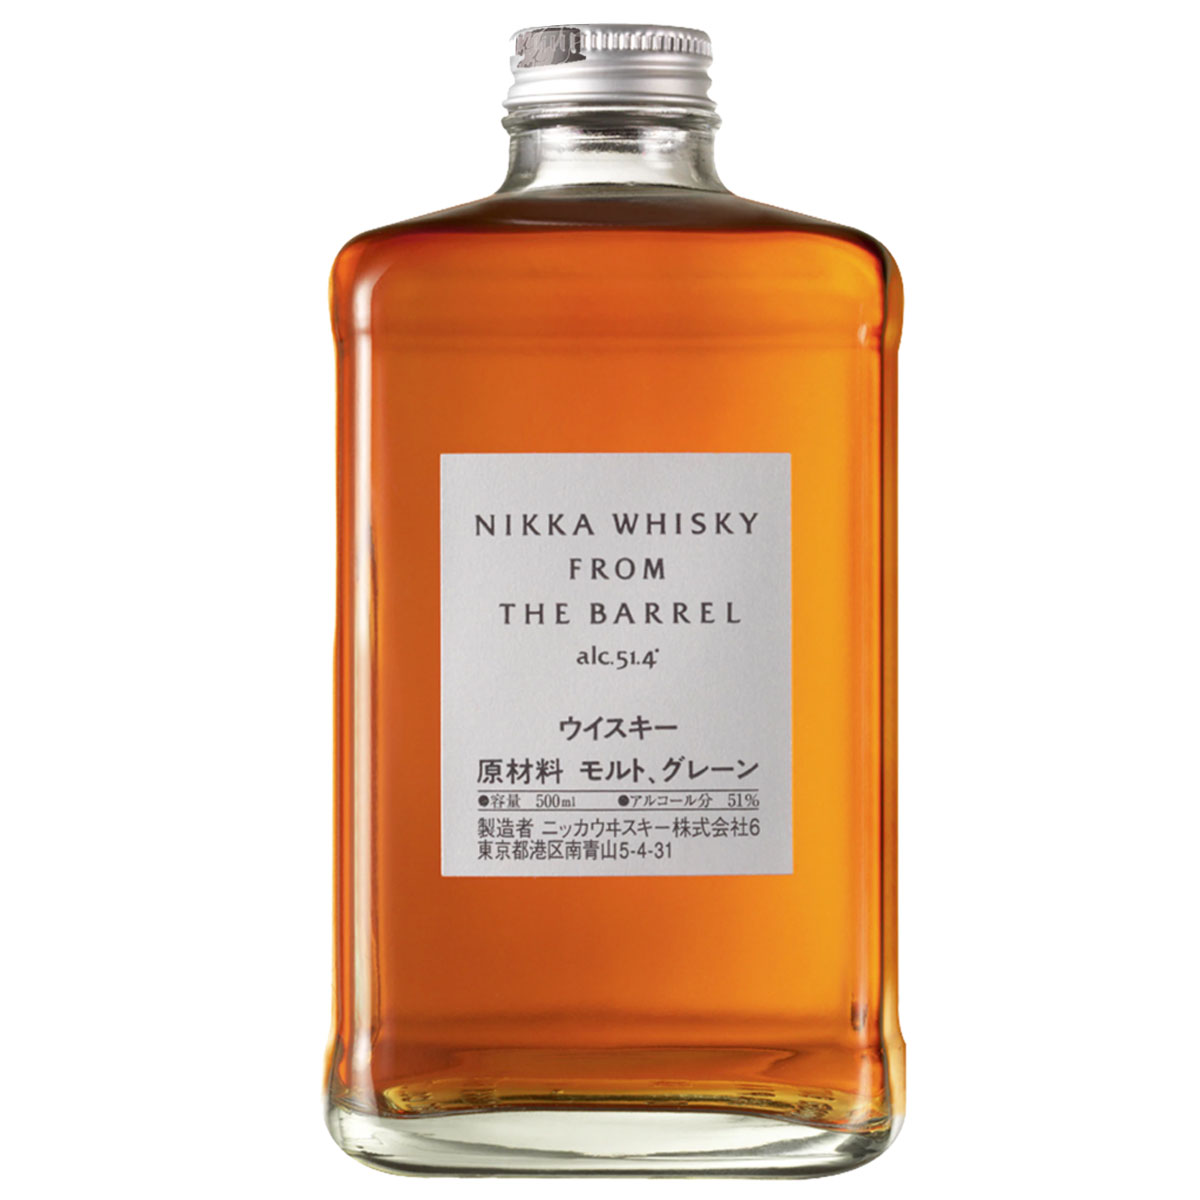 a bottle of nikka from the barrel whisky